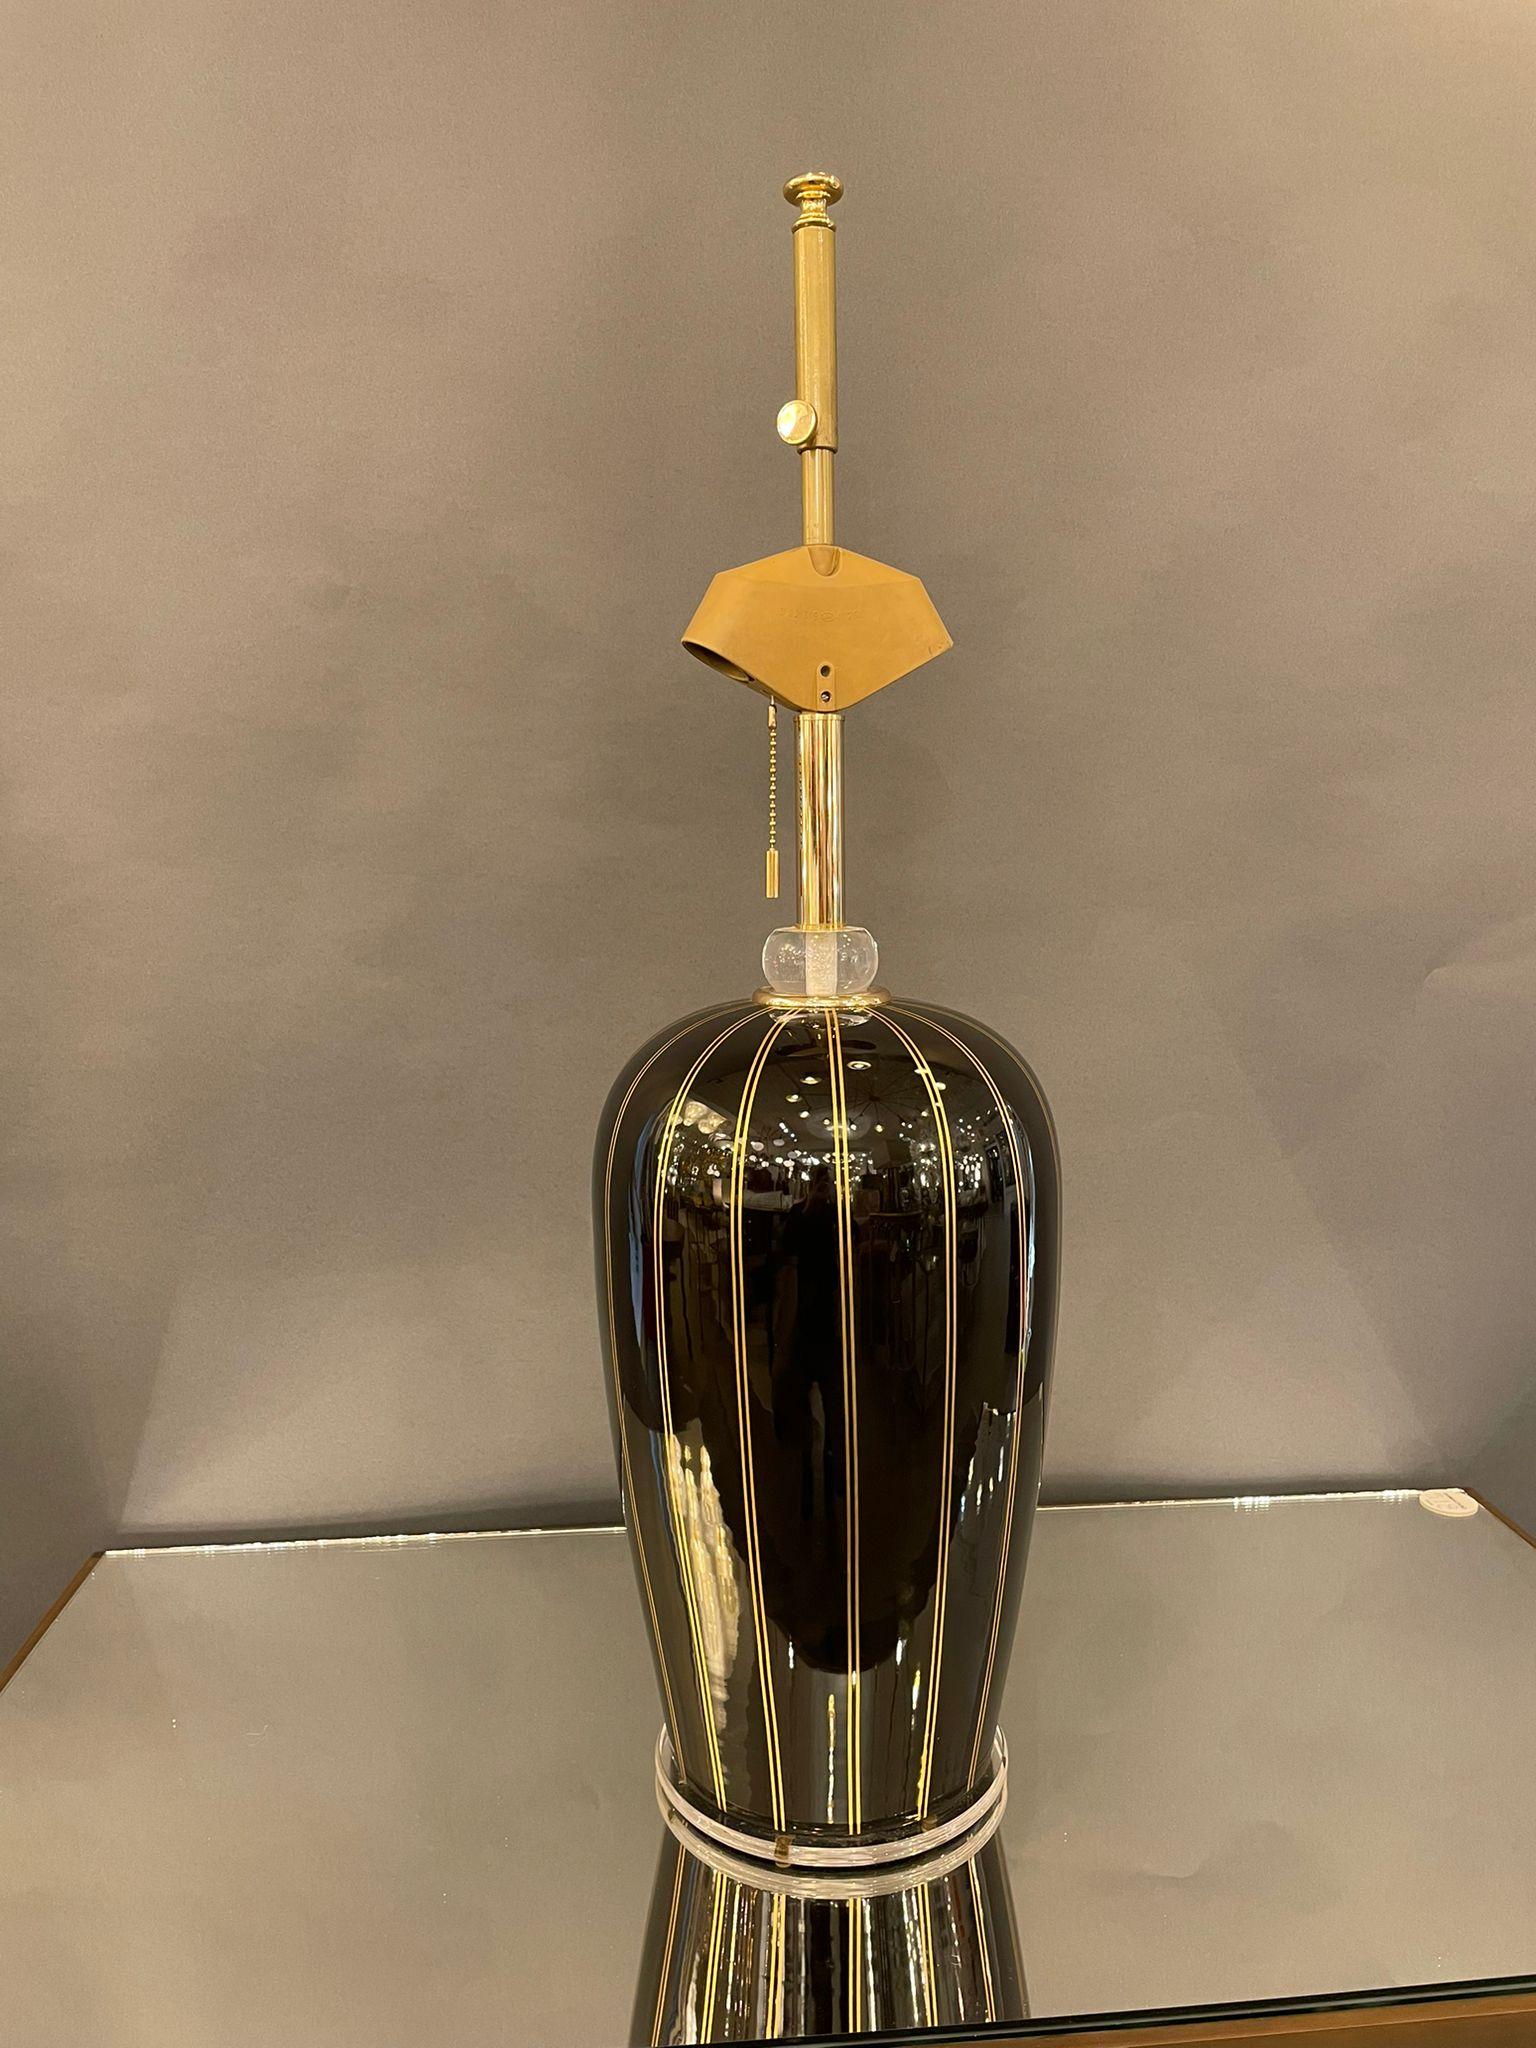 Beautiful Italian table lamp in black Murano glass with Lucite base. Fine hand painted gold lines define the elegant shape.